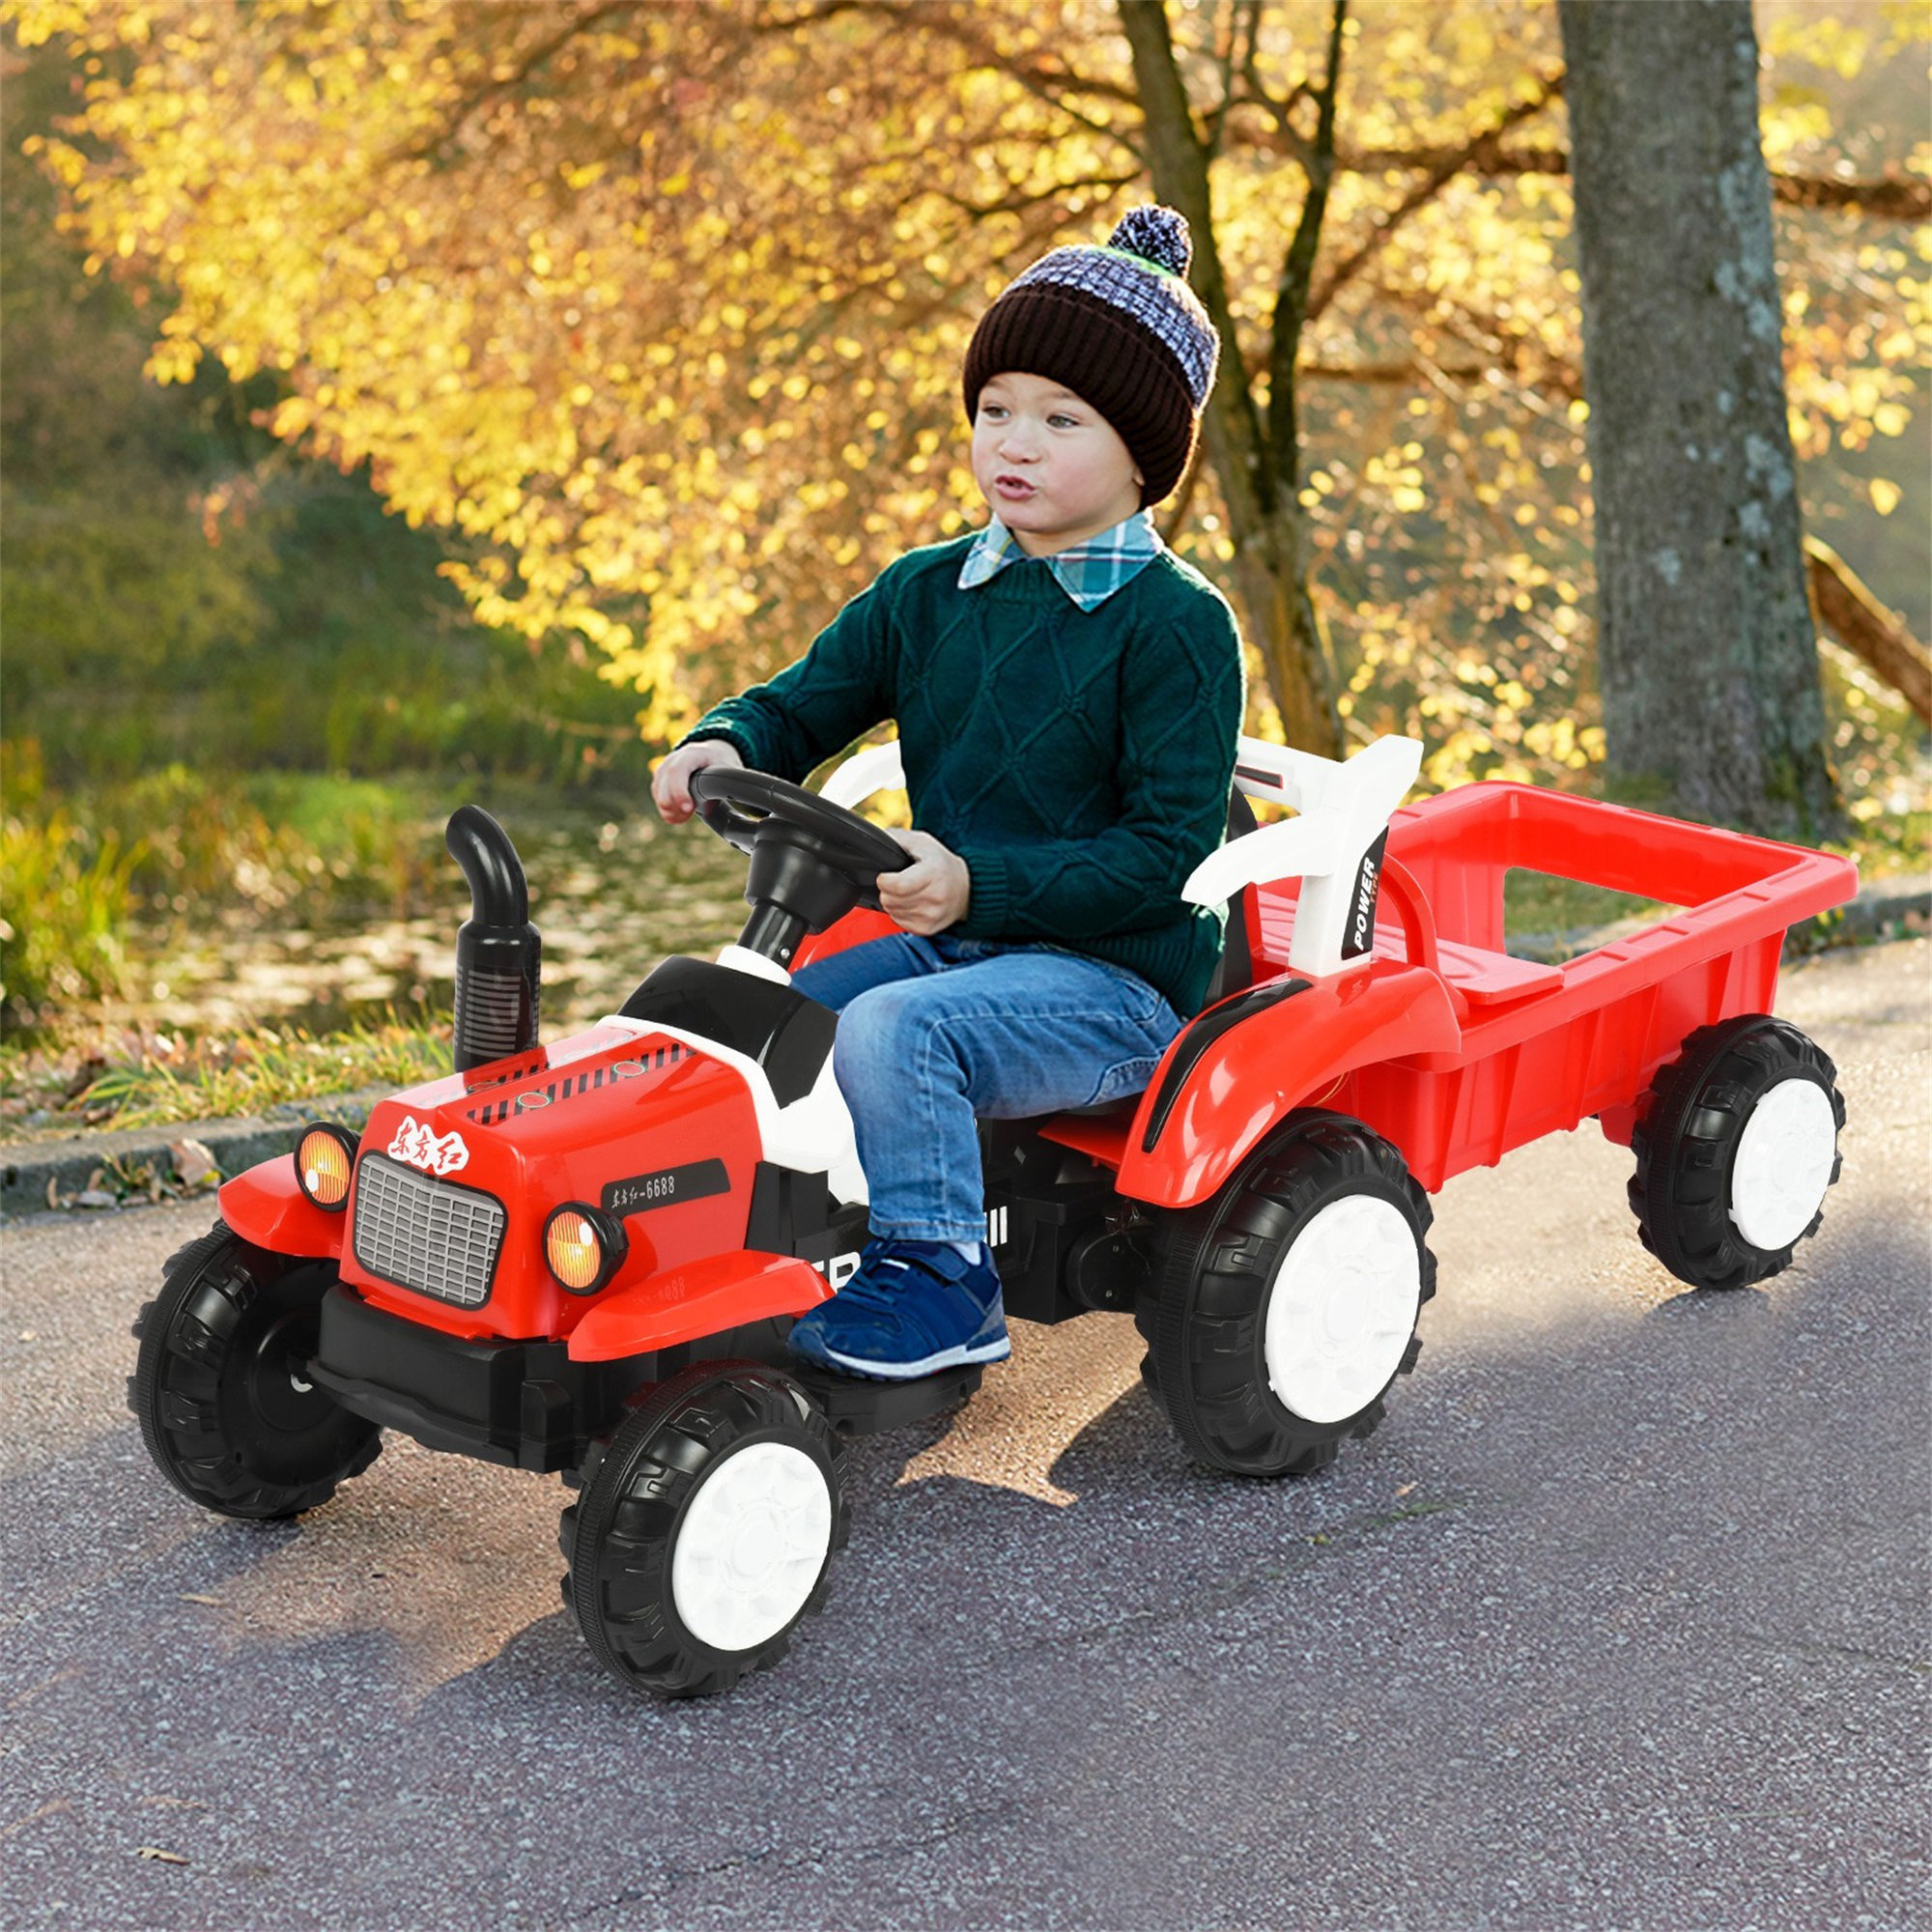 Electric 4 Wheeler For Kids, 12V Battery Powered Electrictoy Car, Ride On Tractor With Detachable Trailer, Adjustable Seat Belt(Age 3 To 8)